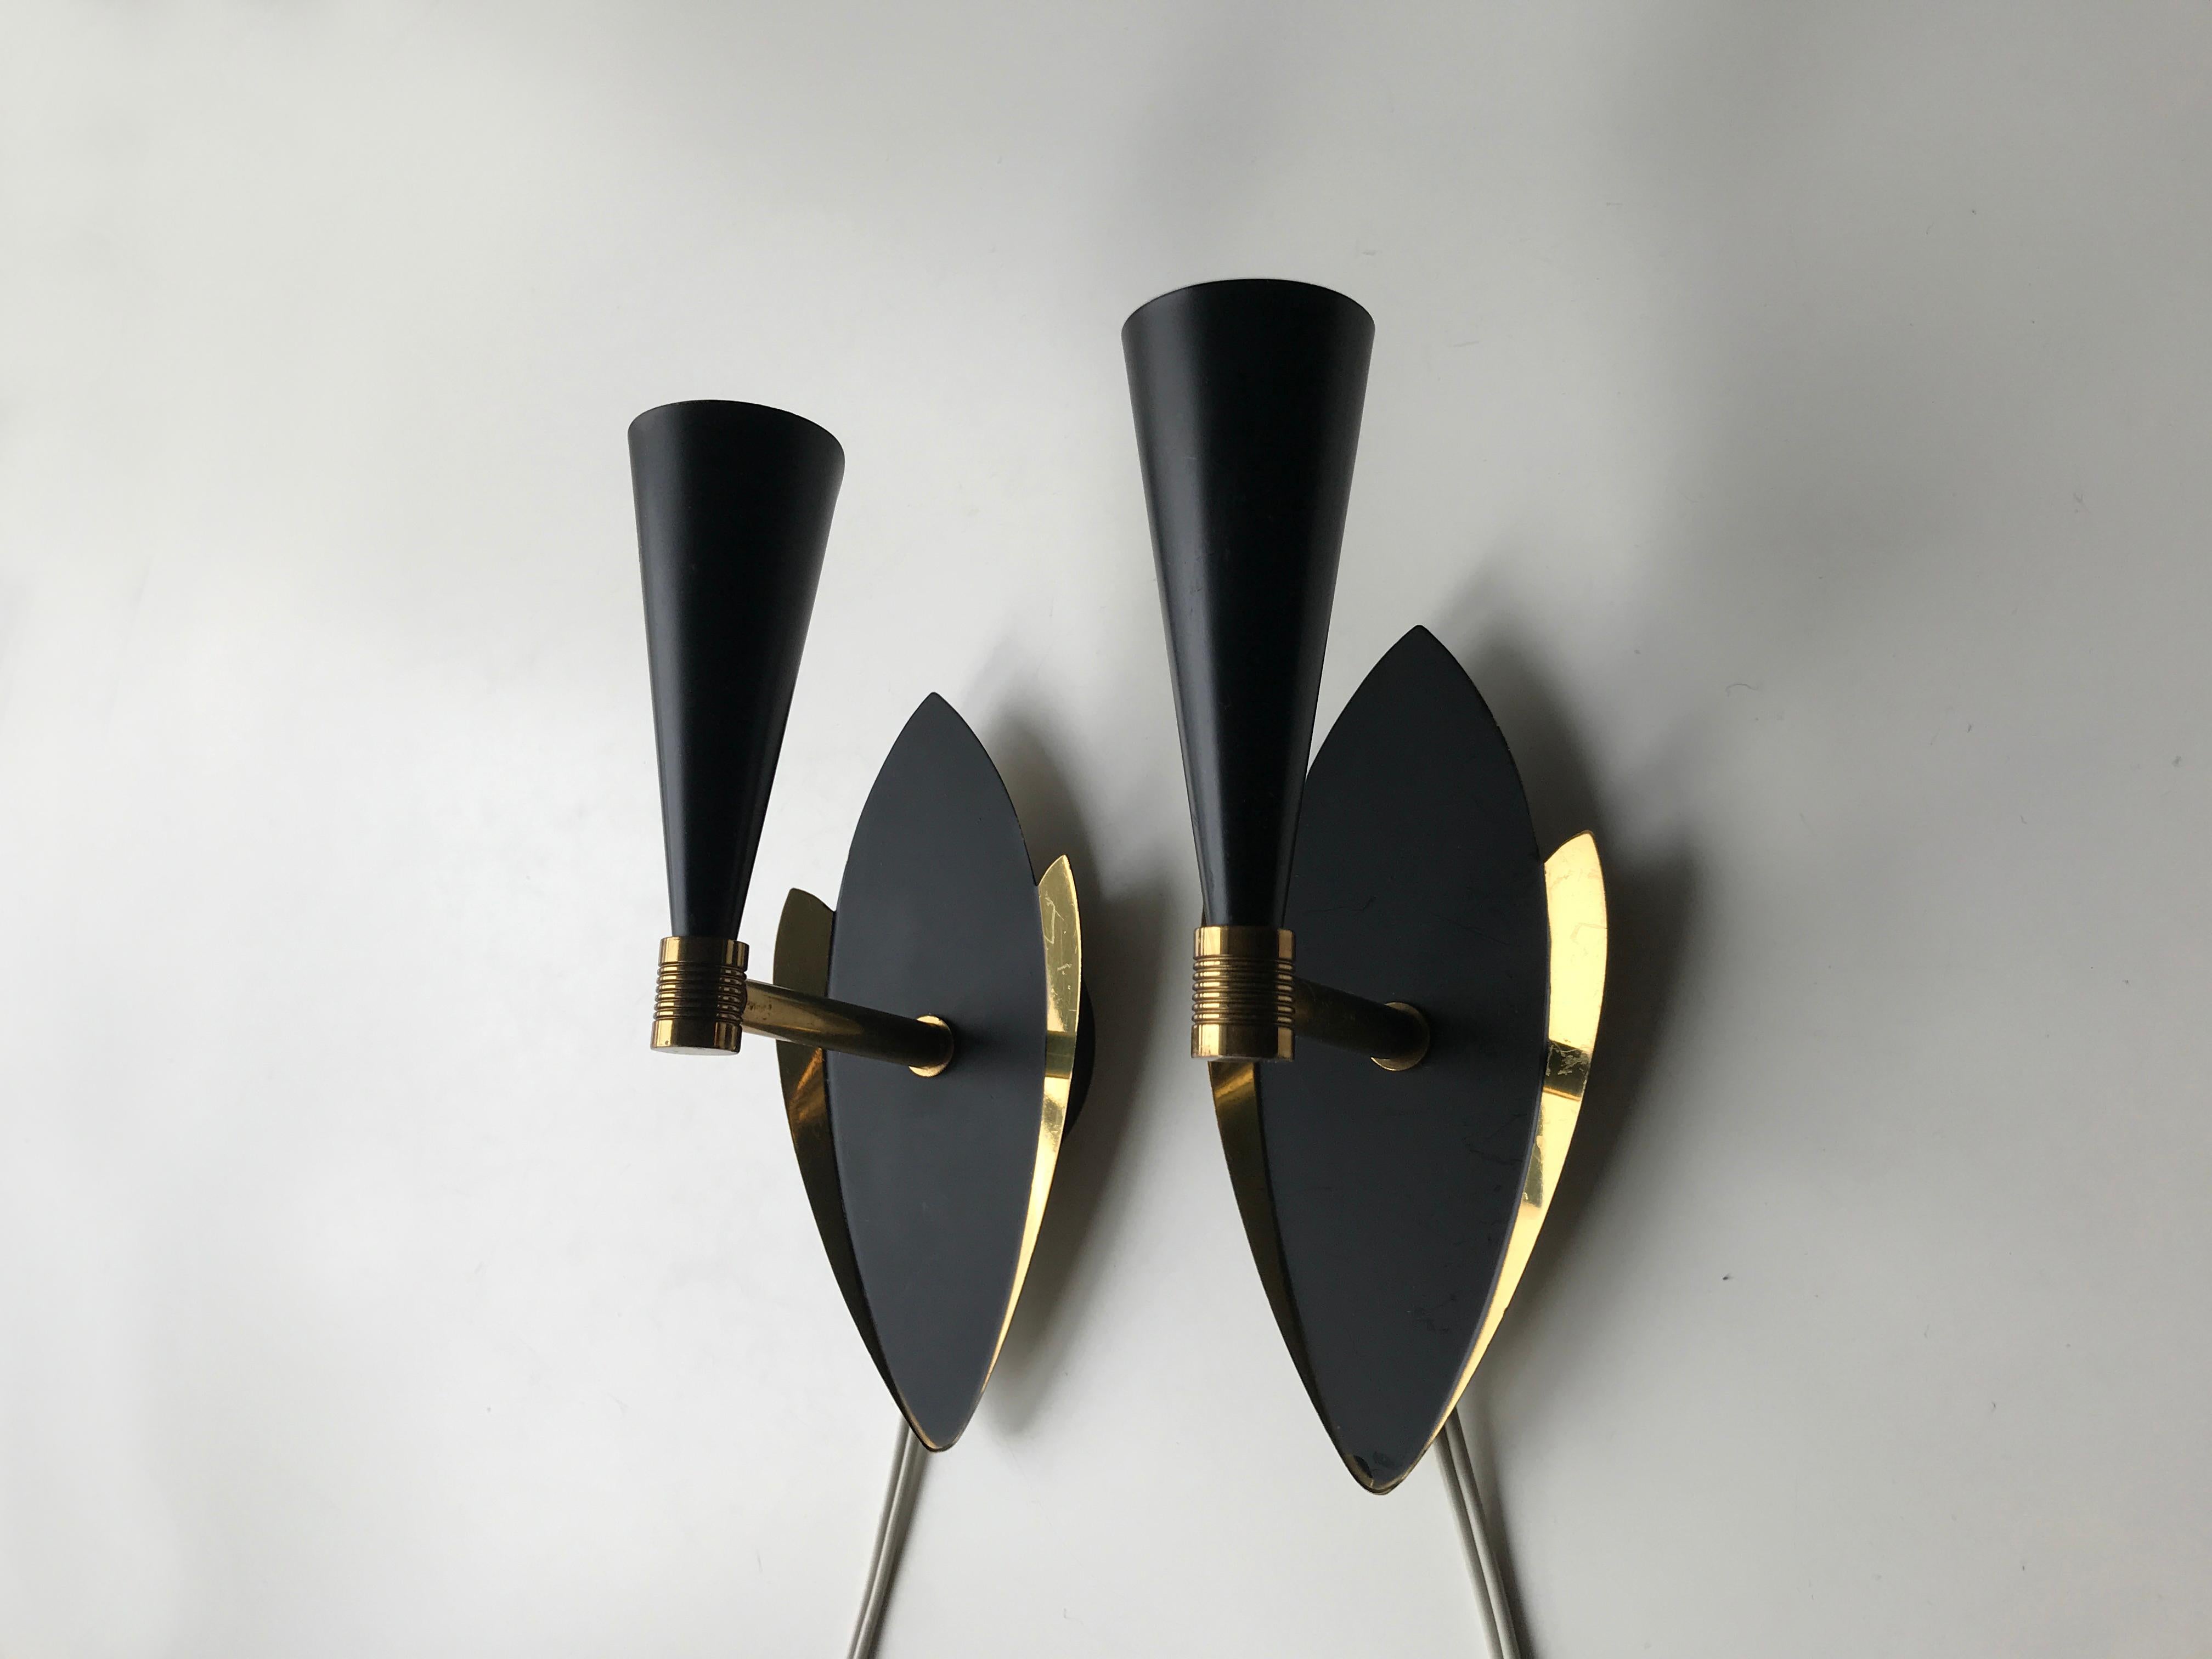 Mid-Century Diablo style Black satin and polished brass pair of wall sconces. Circular wall base with front plate of black matte satin colored surface and wings of polished brass. No label or marks to identify but presumably made by Danish